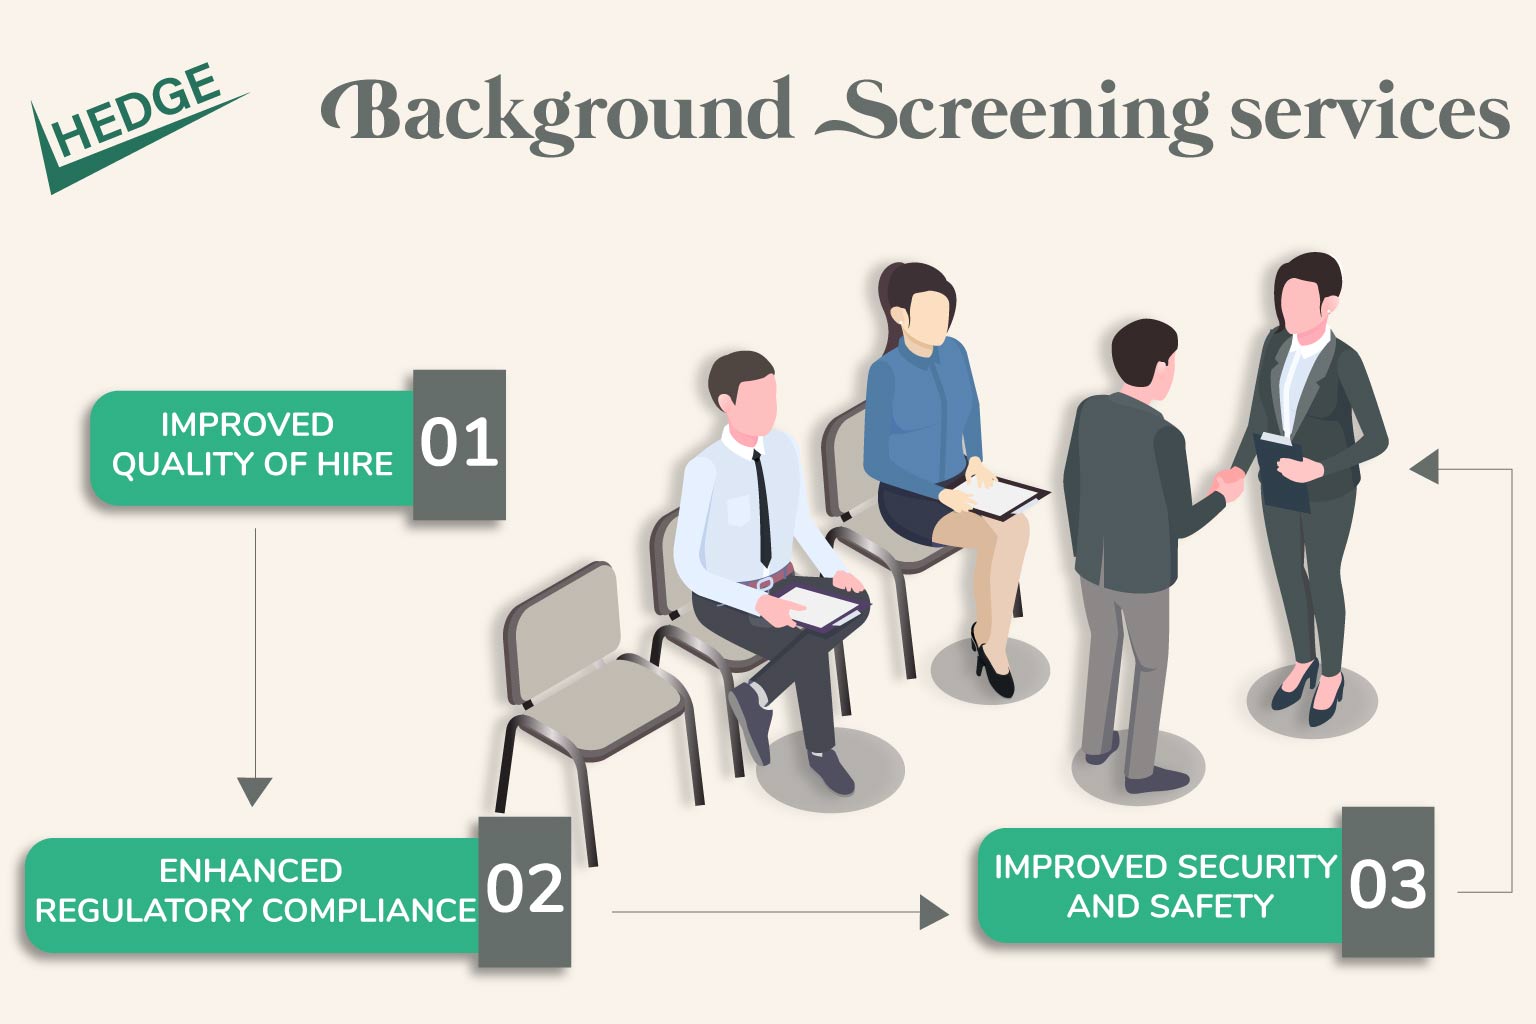 Background Screening Services in Dhaka